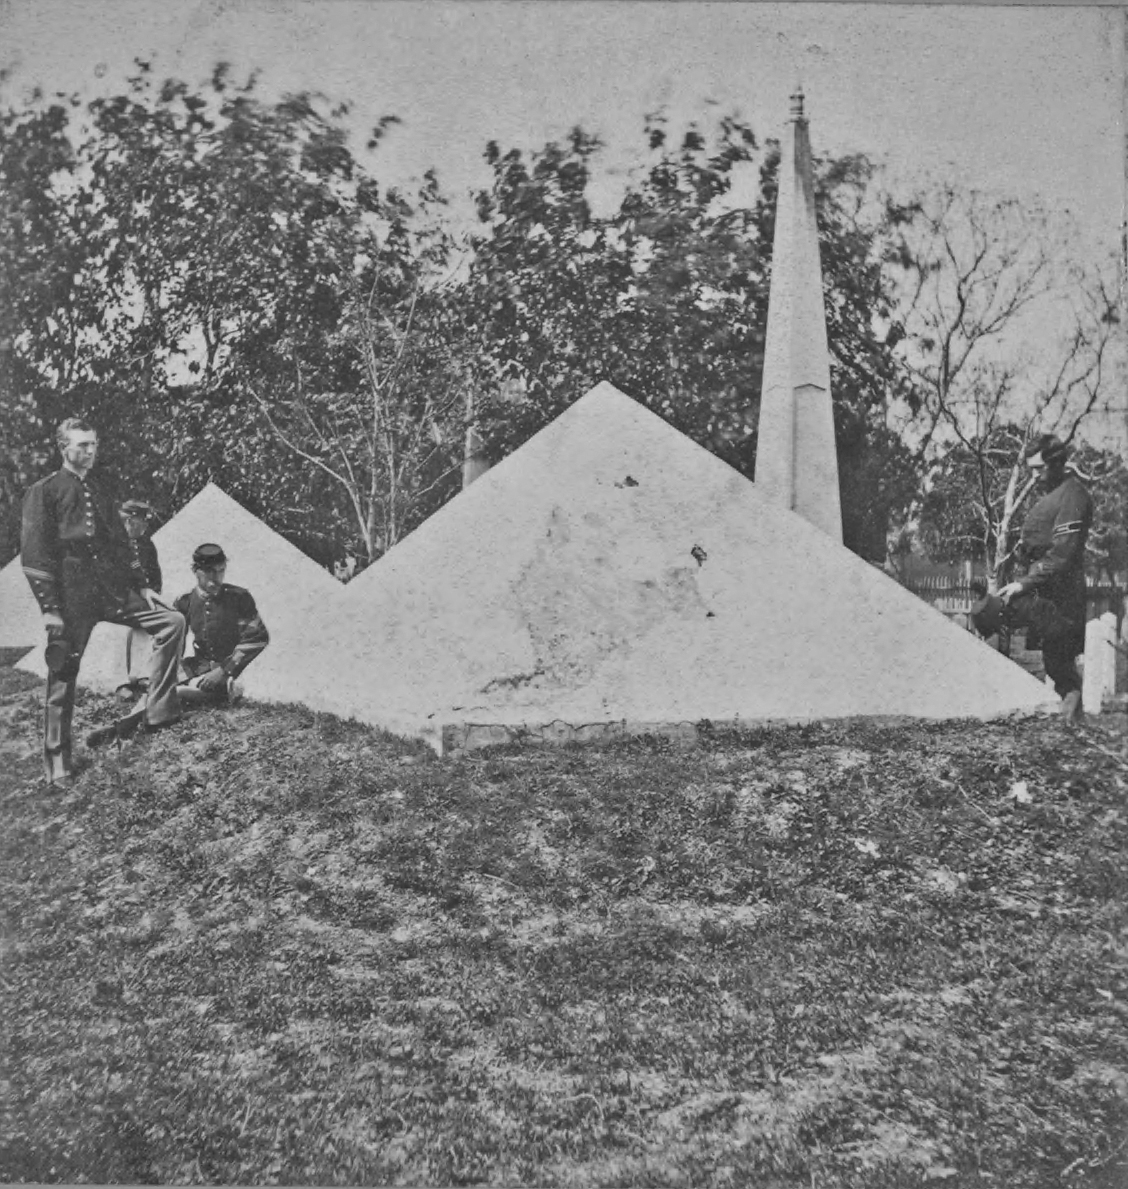 Soldiers pose beside the pyramids and obelisk, c. 1885. The burial grounds containing the memorial at the U.S. Army post in St. Augustine were designated a national cemetery in 1881. (New York Public Library)